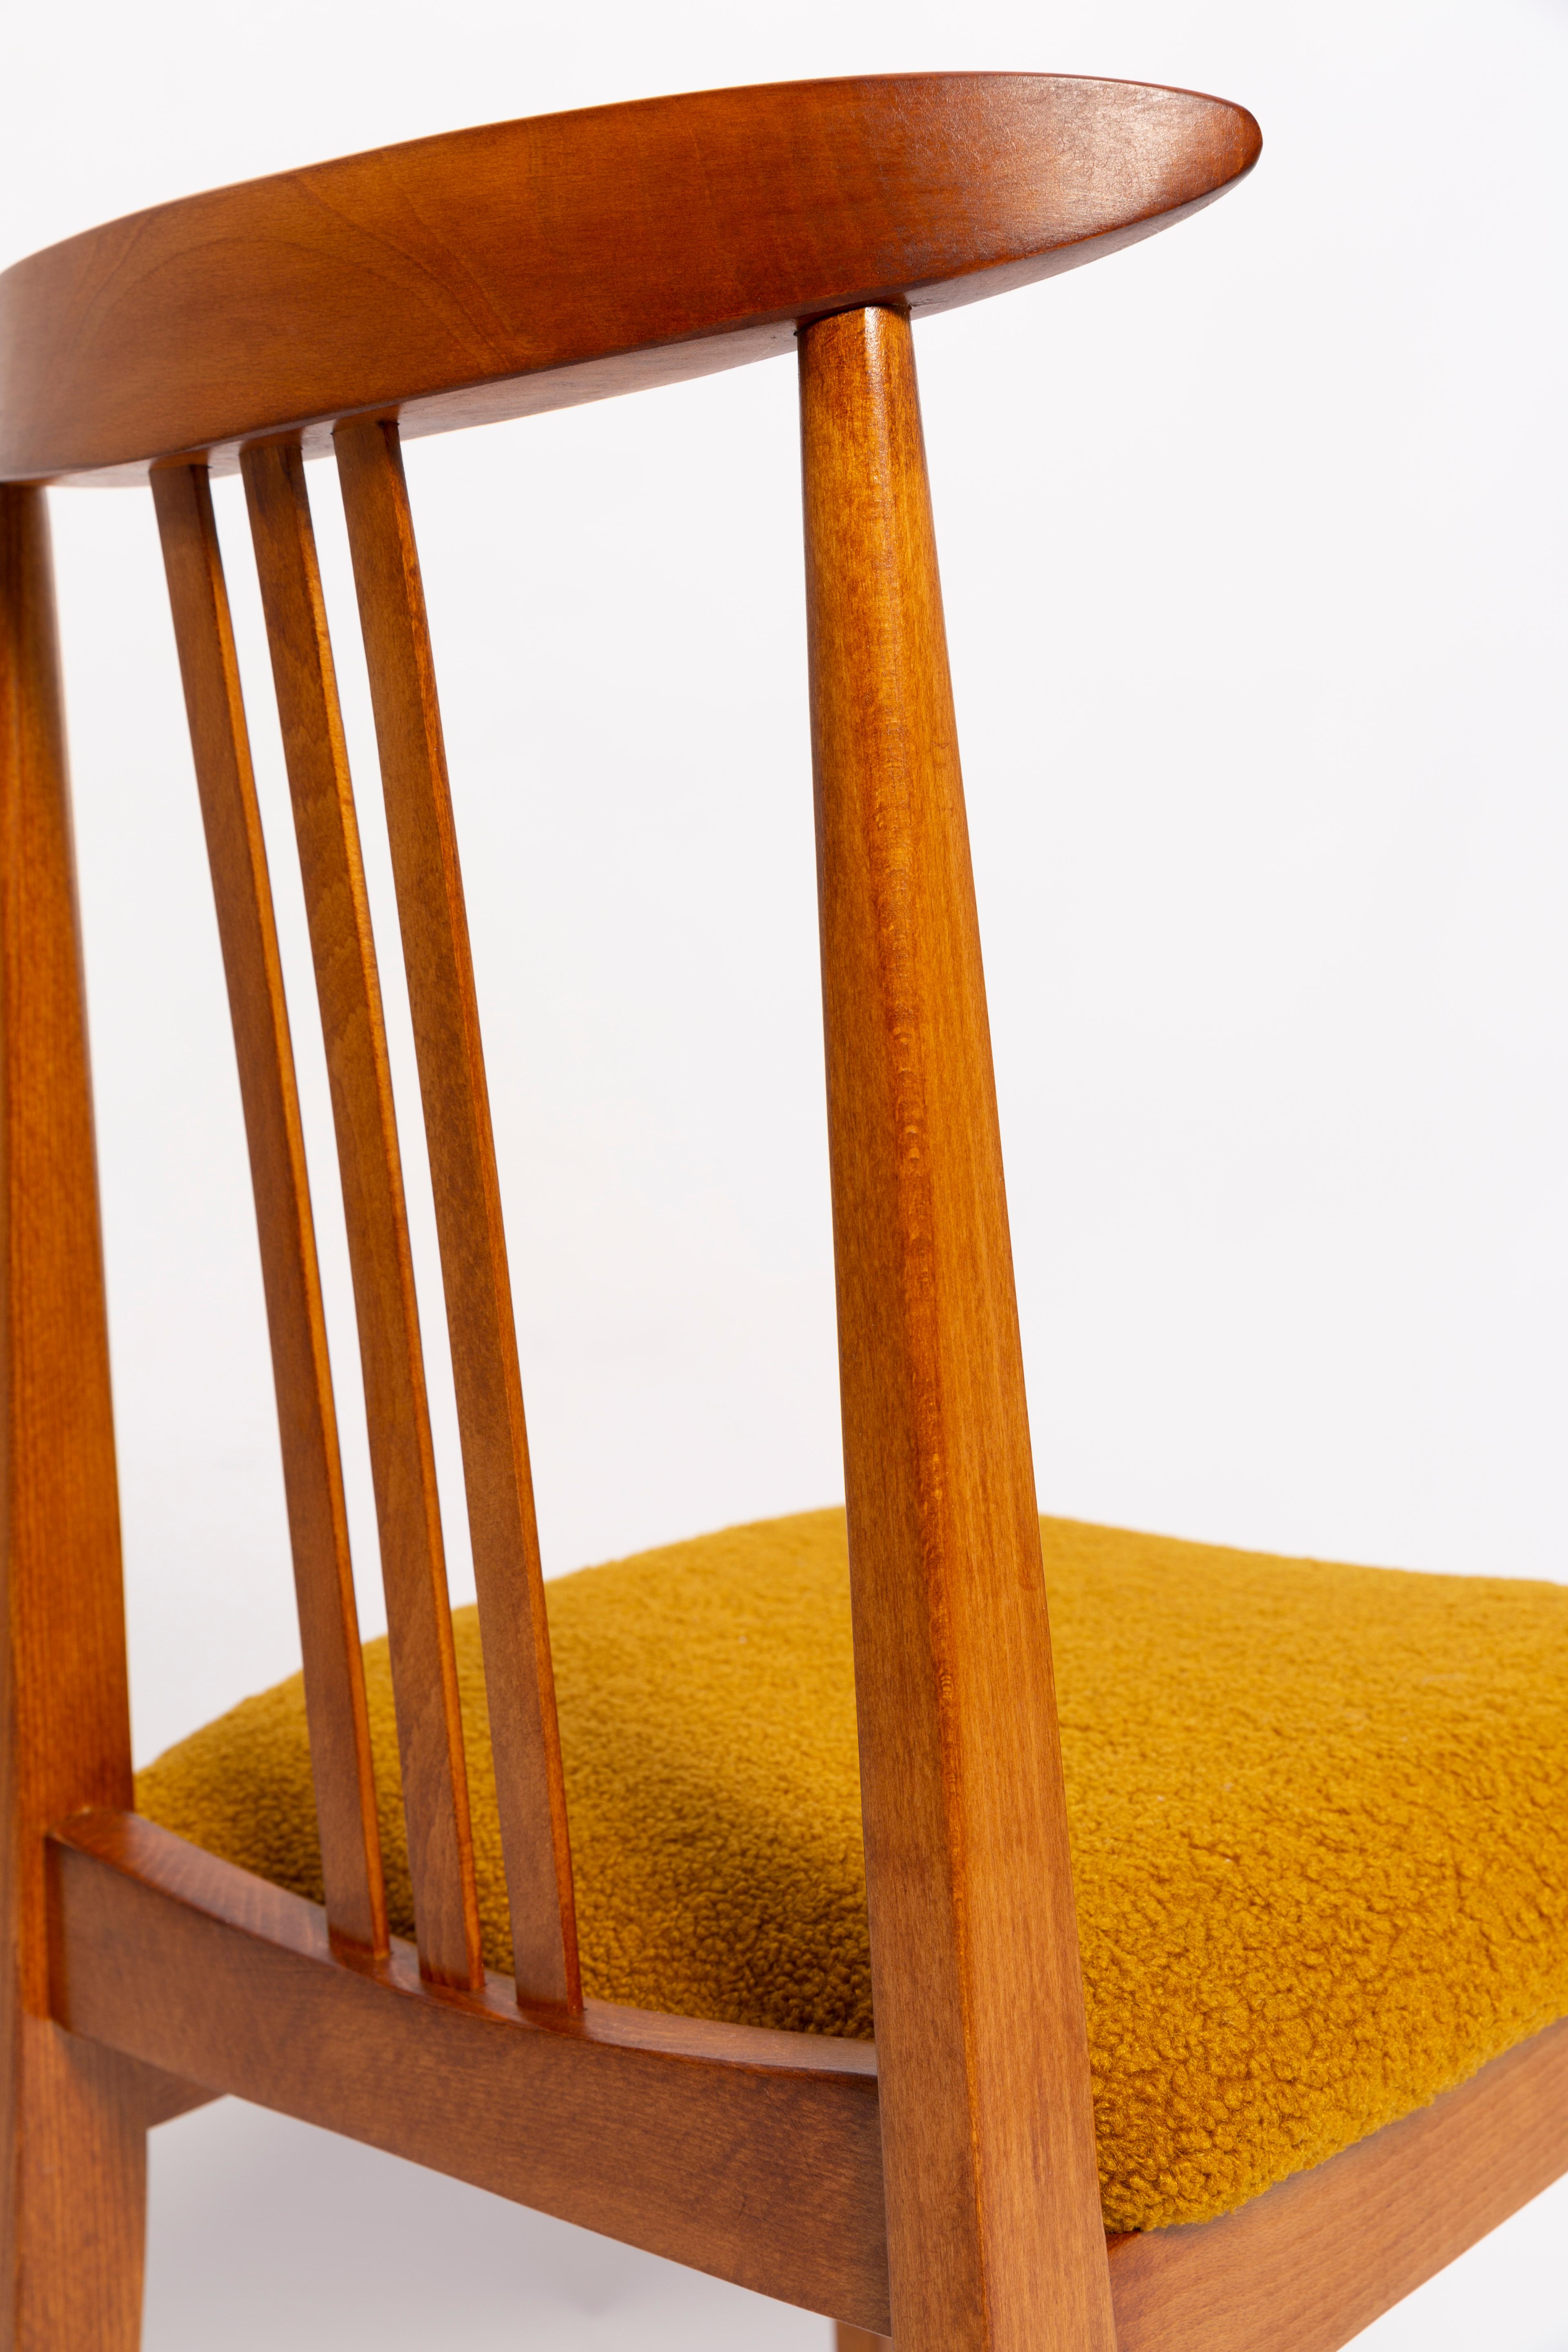 Hand-Crafted Ten Mid-Century Ochre Boucle Chairs, Medium Wood, M. Zielinski, Europe, 1960s For Sale